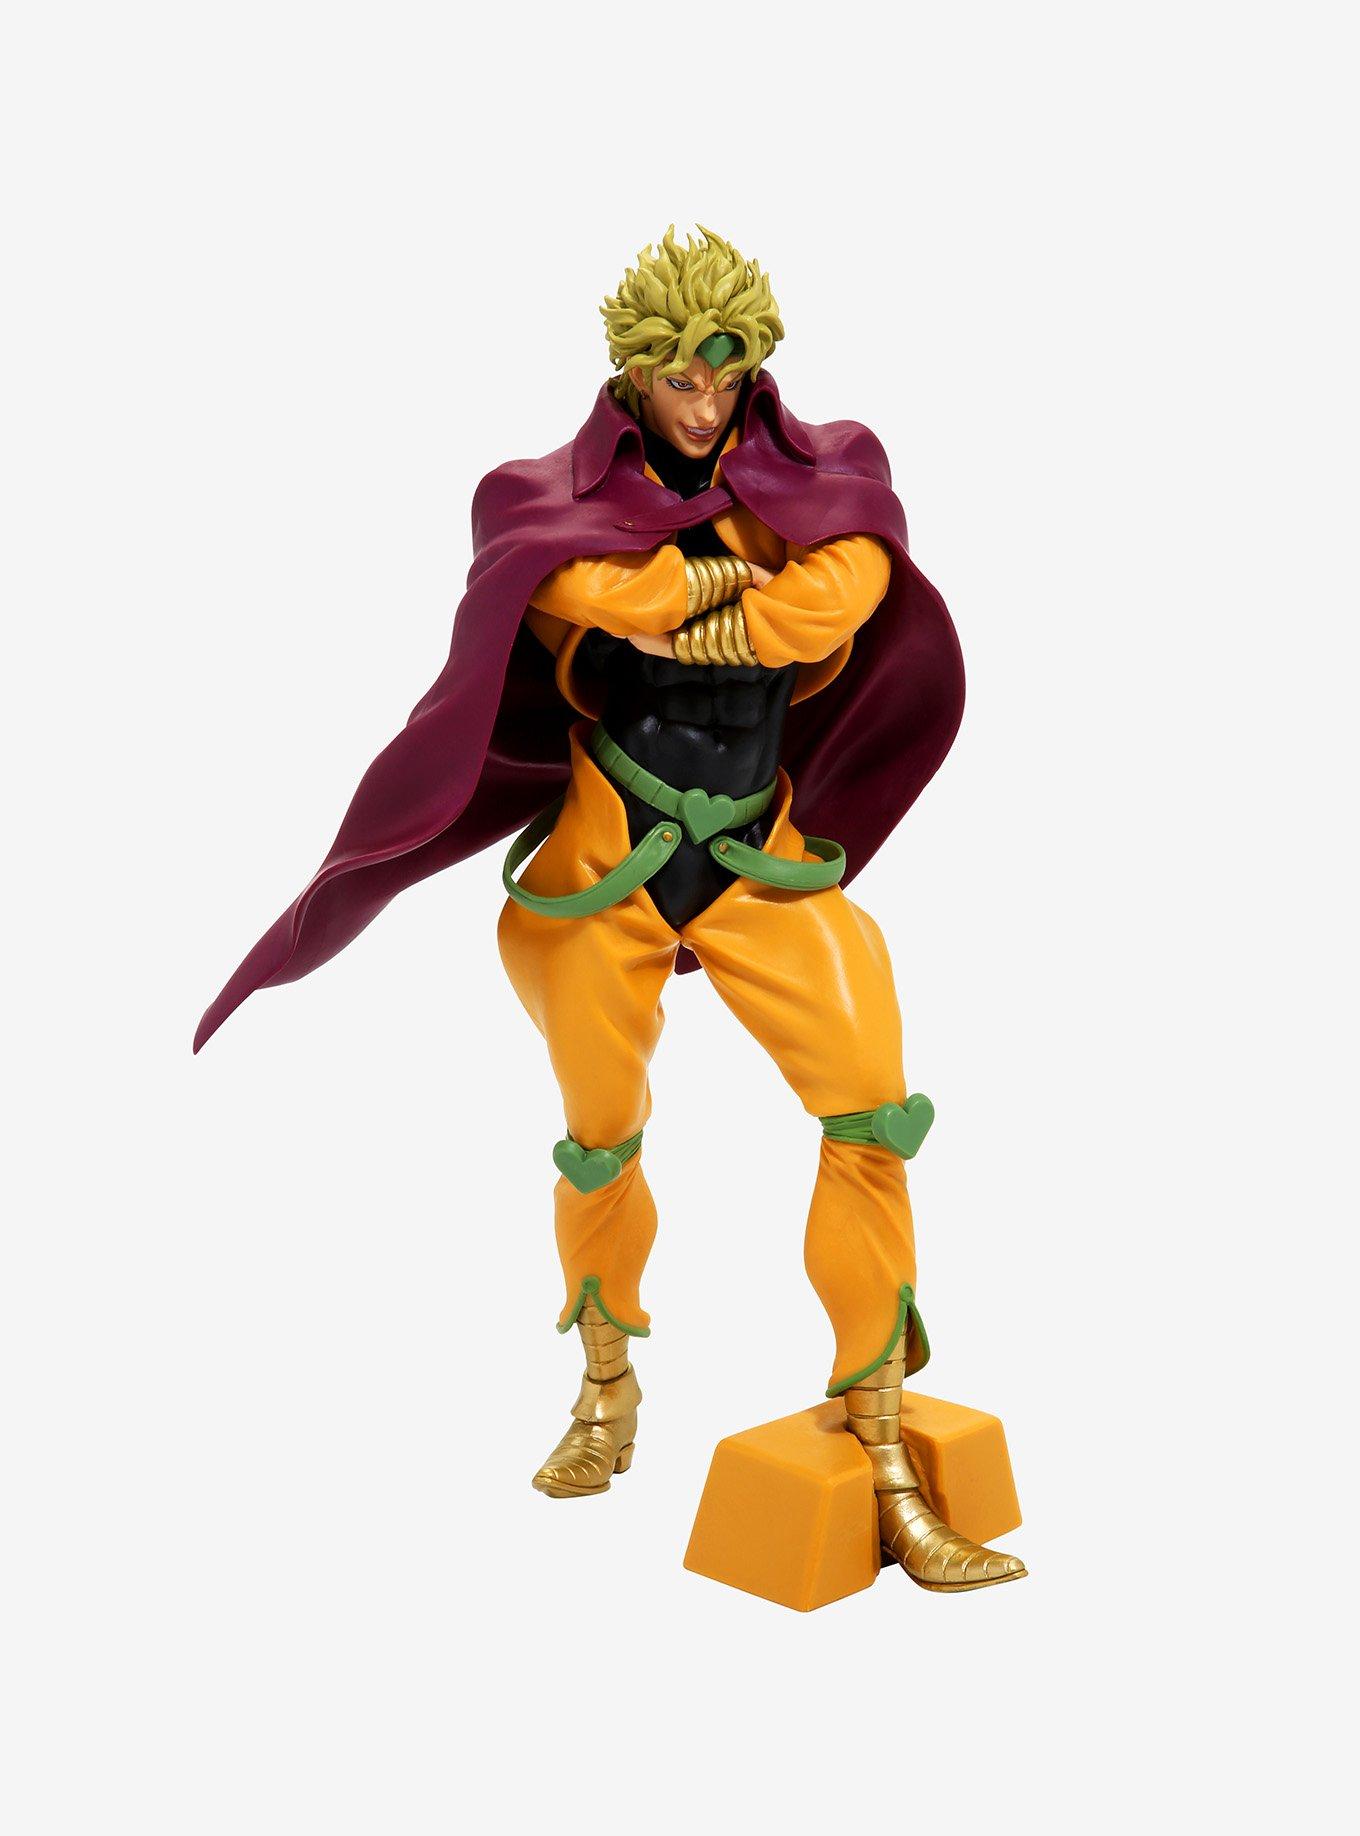 Dio Brando Projects  Photos, videos, logos, illustrations and